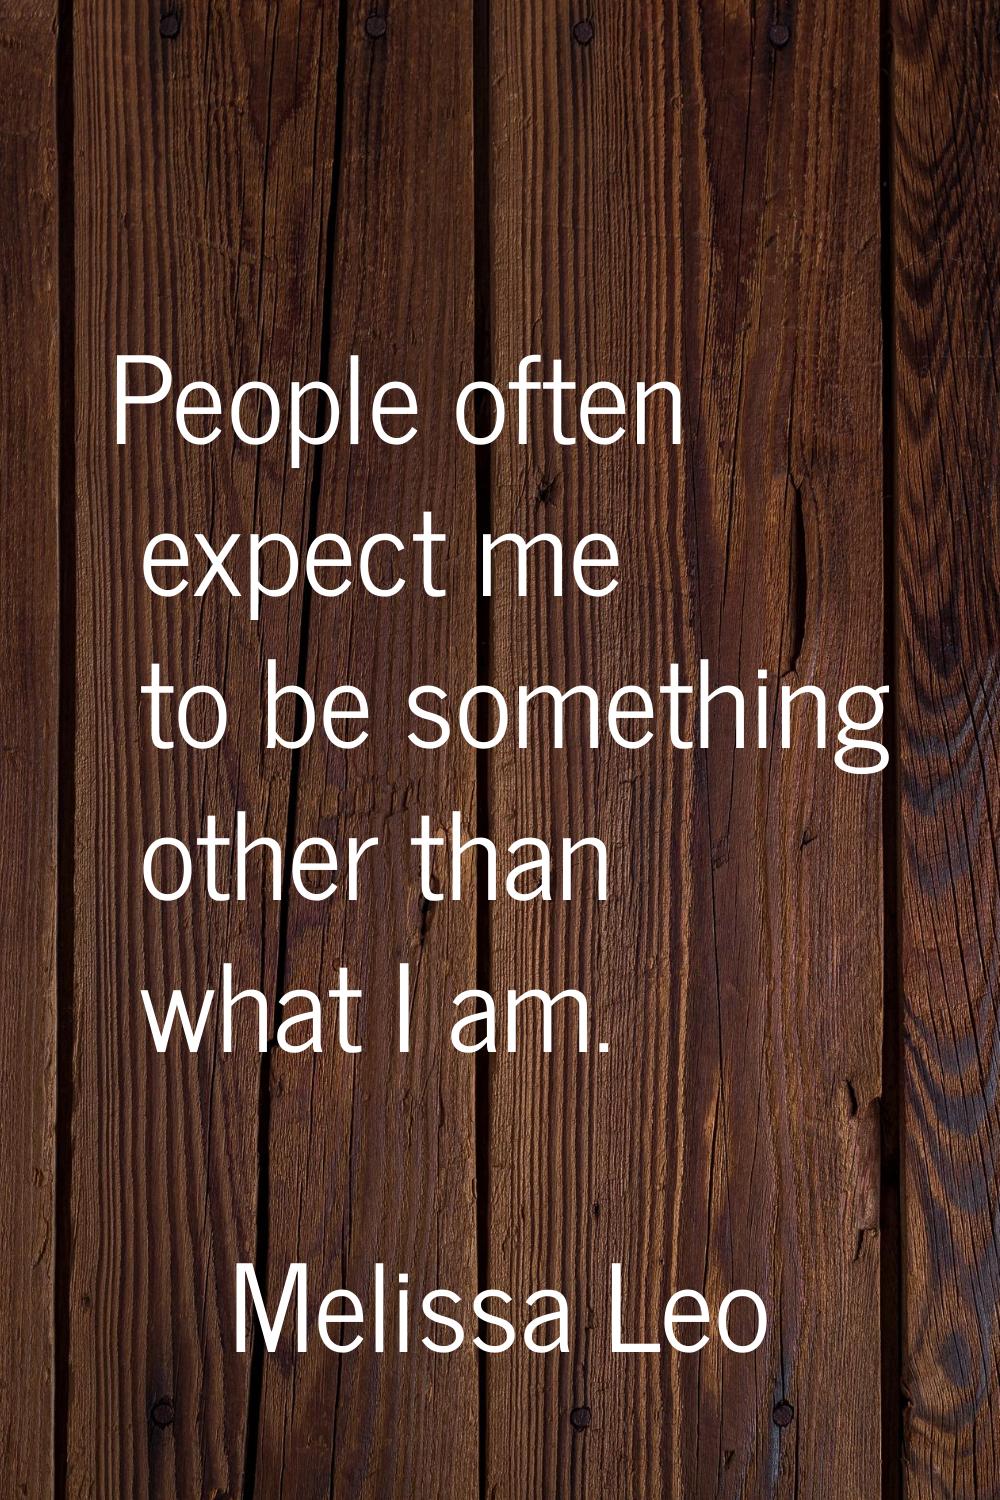 People often expect me to be something other than what I am.